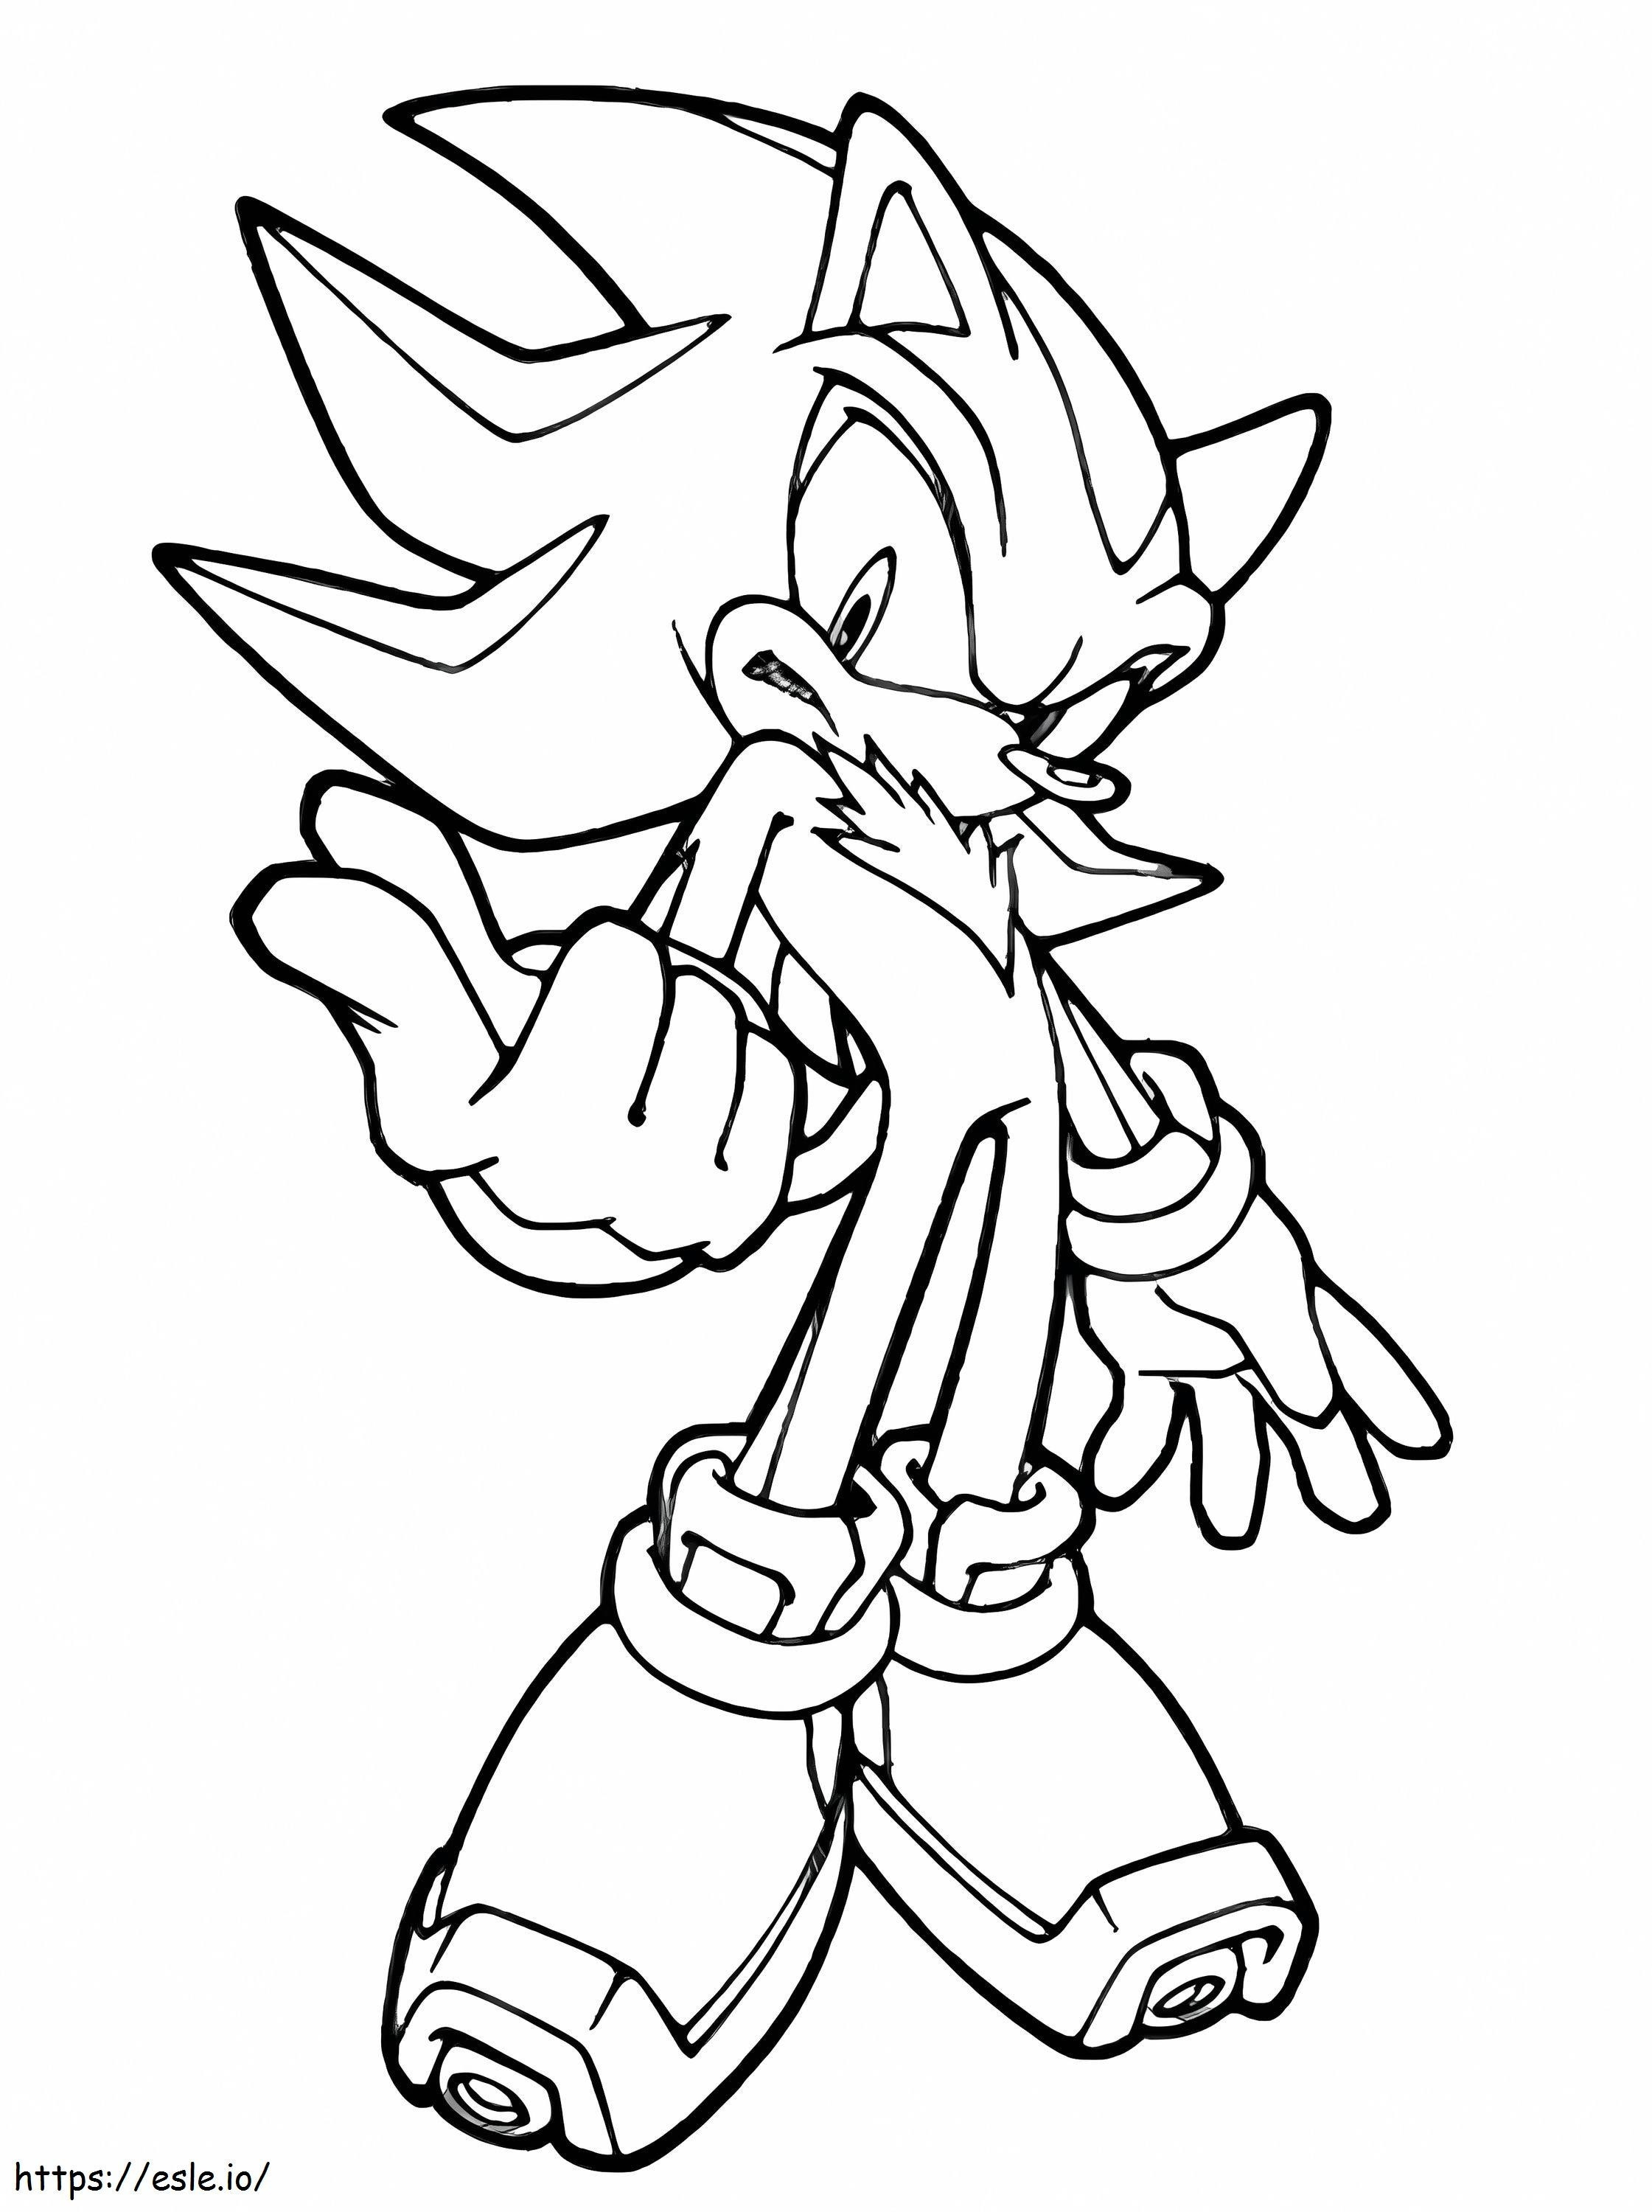 Sonic 3 765X1024 coloring page